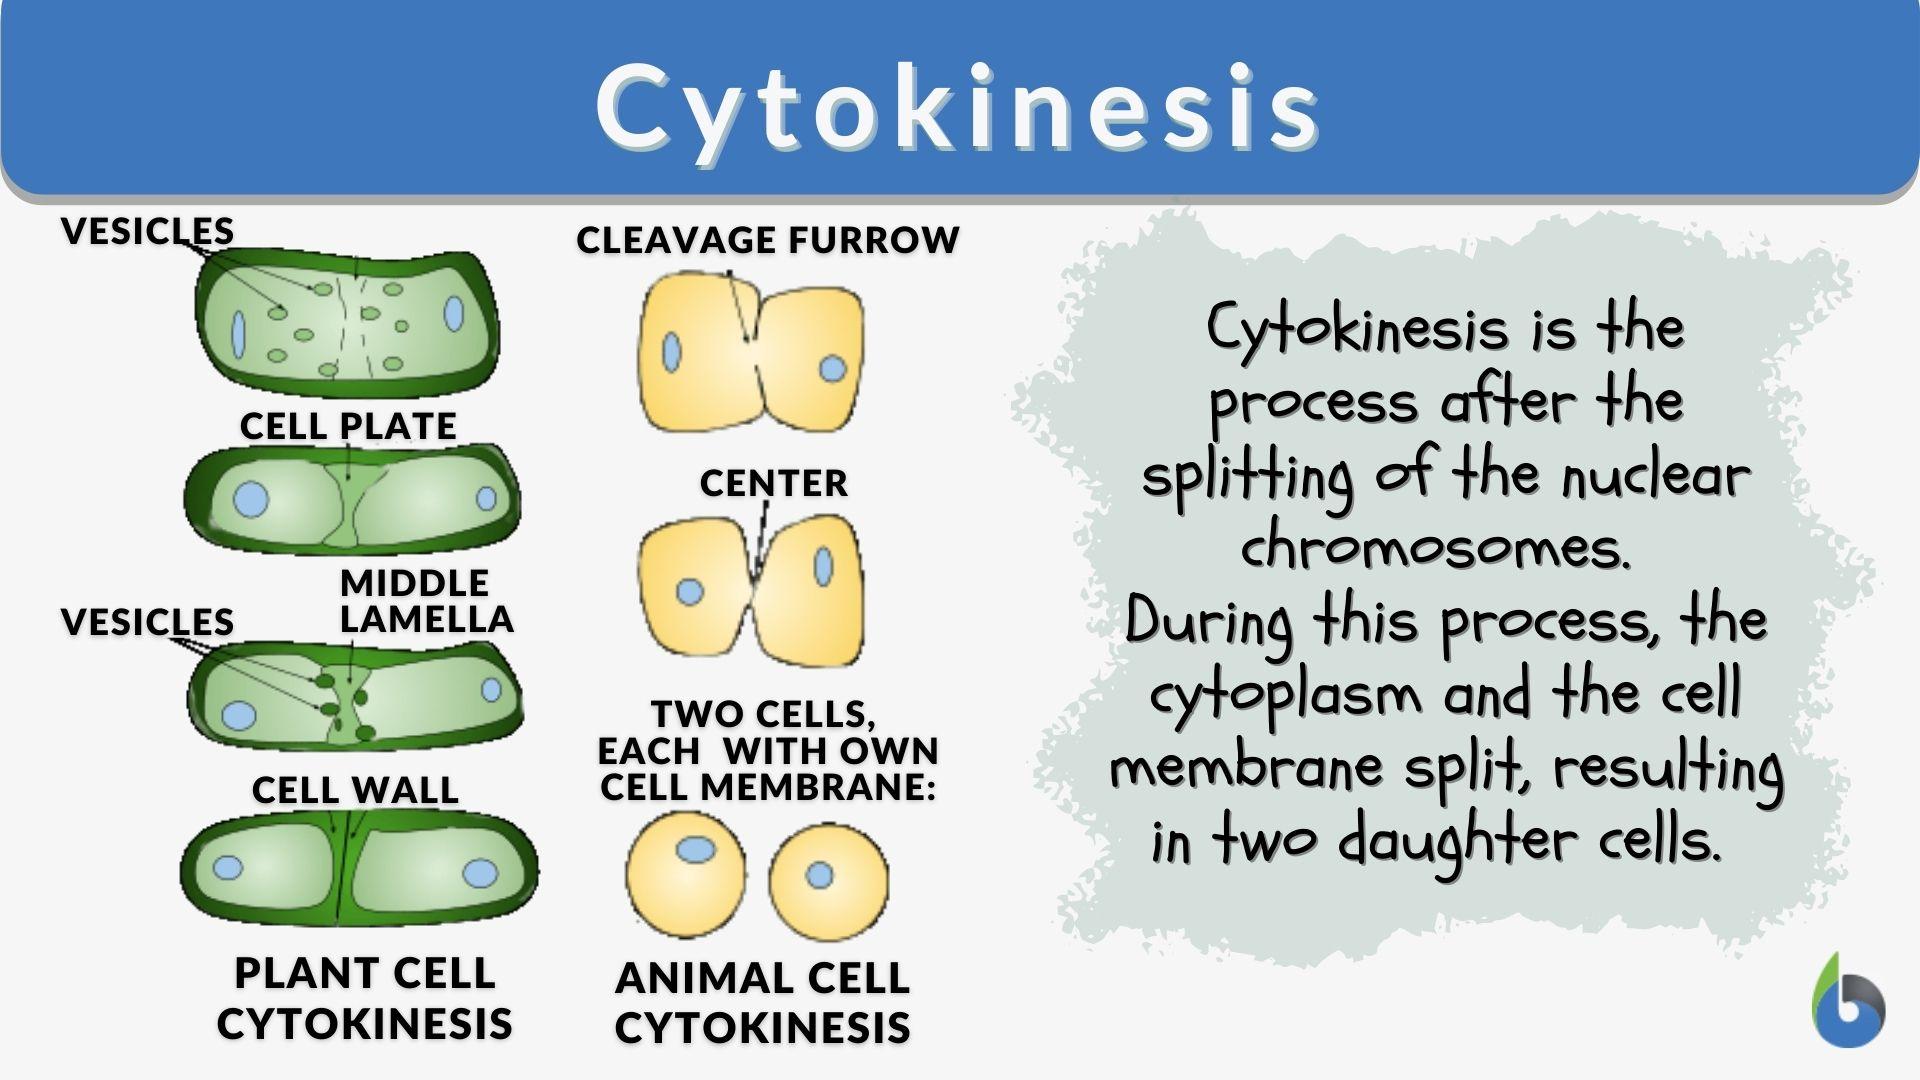 Cytokinesis Definition and Examples - Biology Online Dictionary